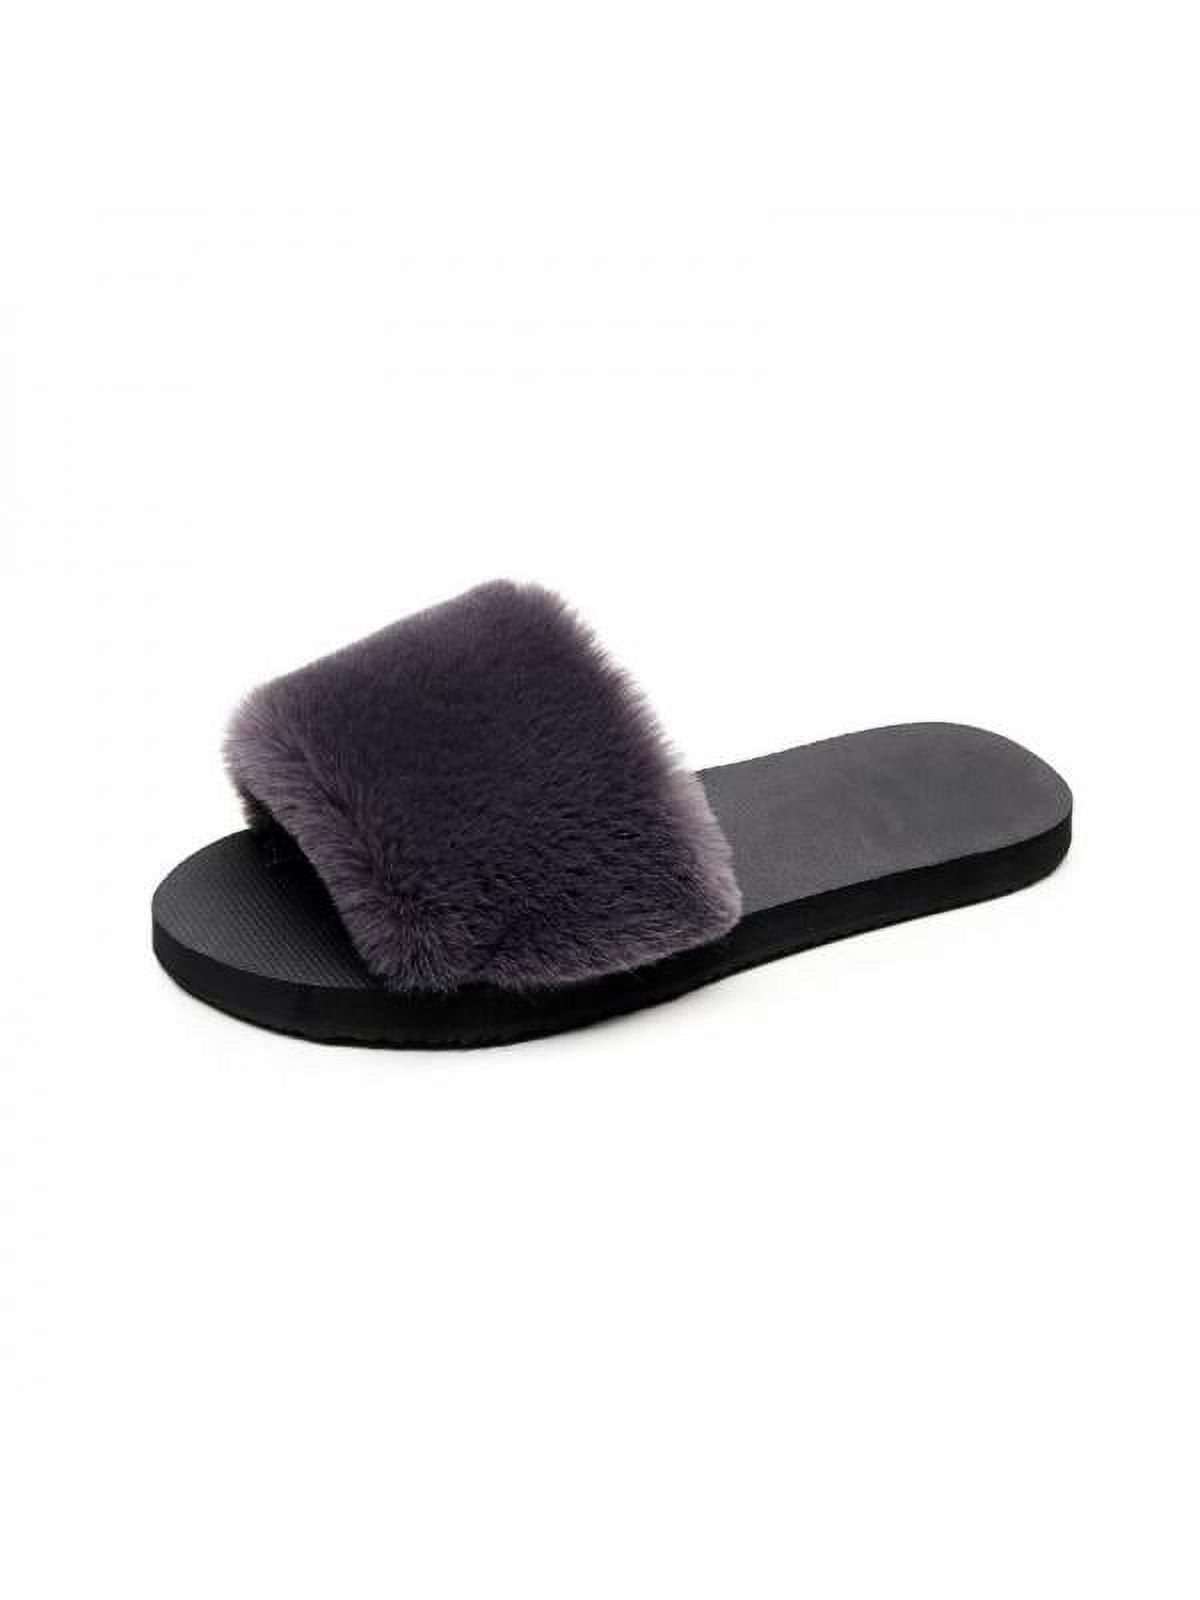 Ropalia Womens Winter Fur Solid Color Slippers Home Anti-Slip Warm Cotton Trailer Shoes Ladies Casual Shoes - image 1 of 3